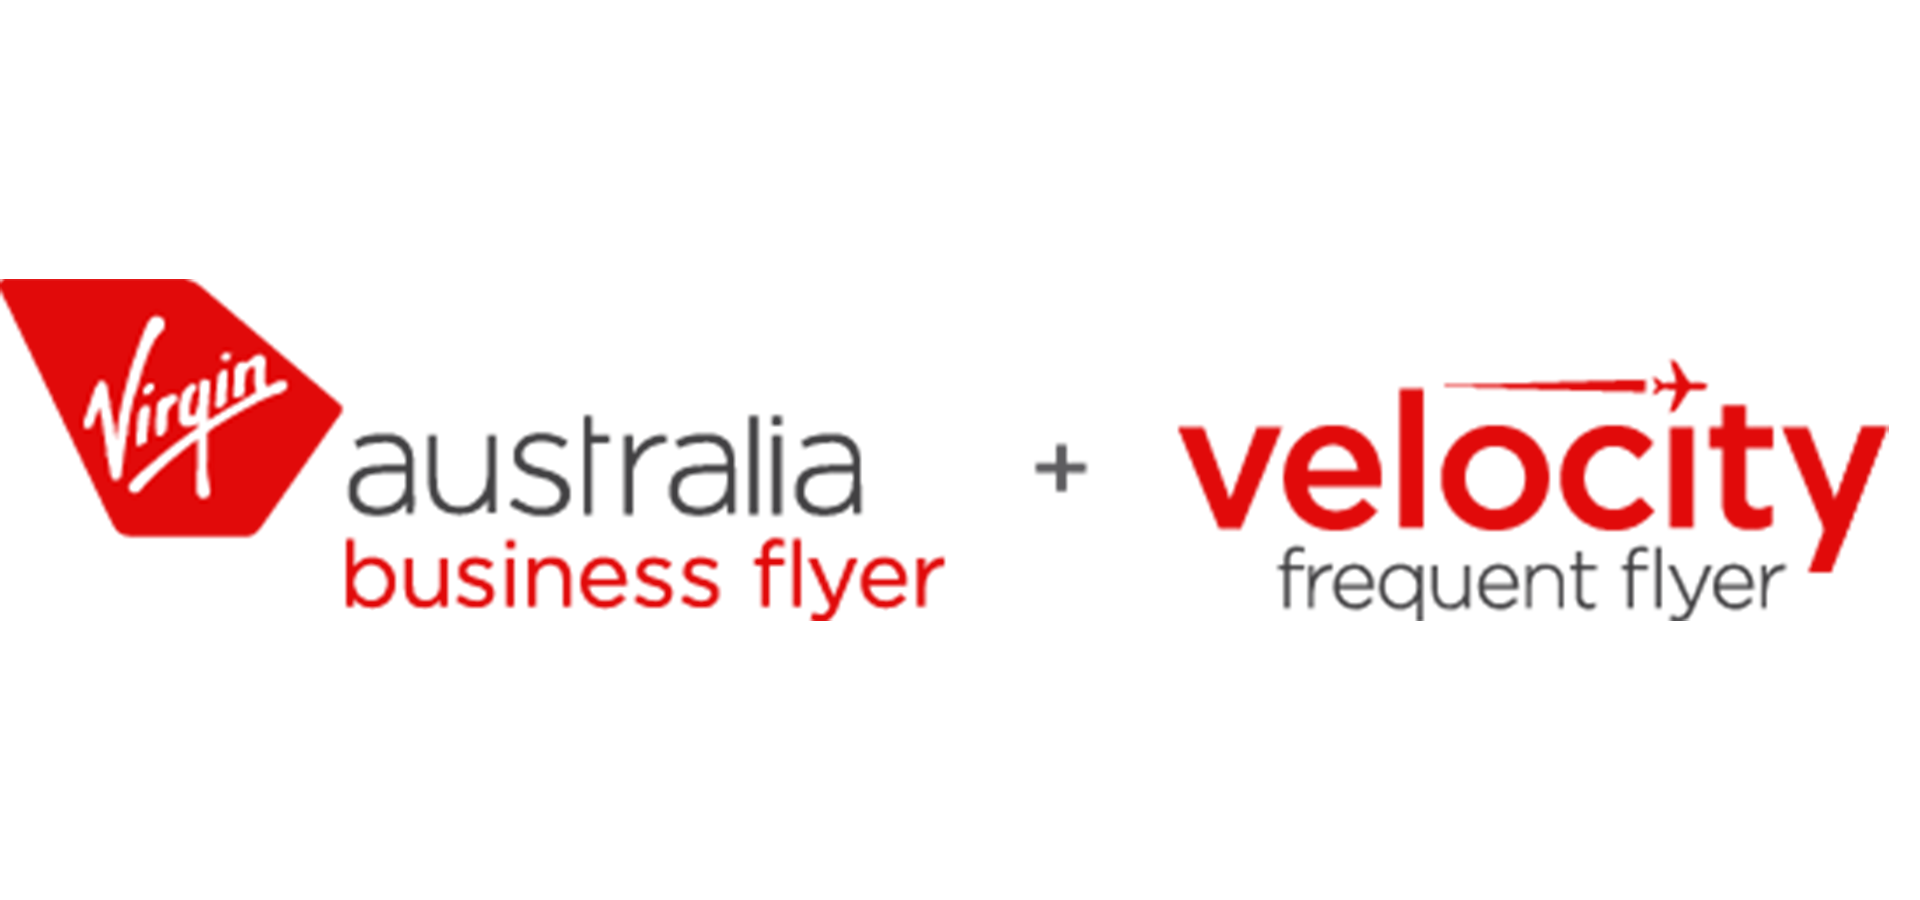 Virgin Australia Business Flyer and Velocity Frequent Flyer logo lockup